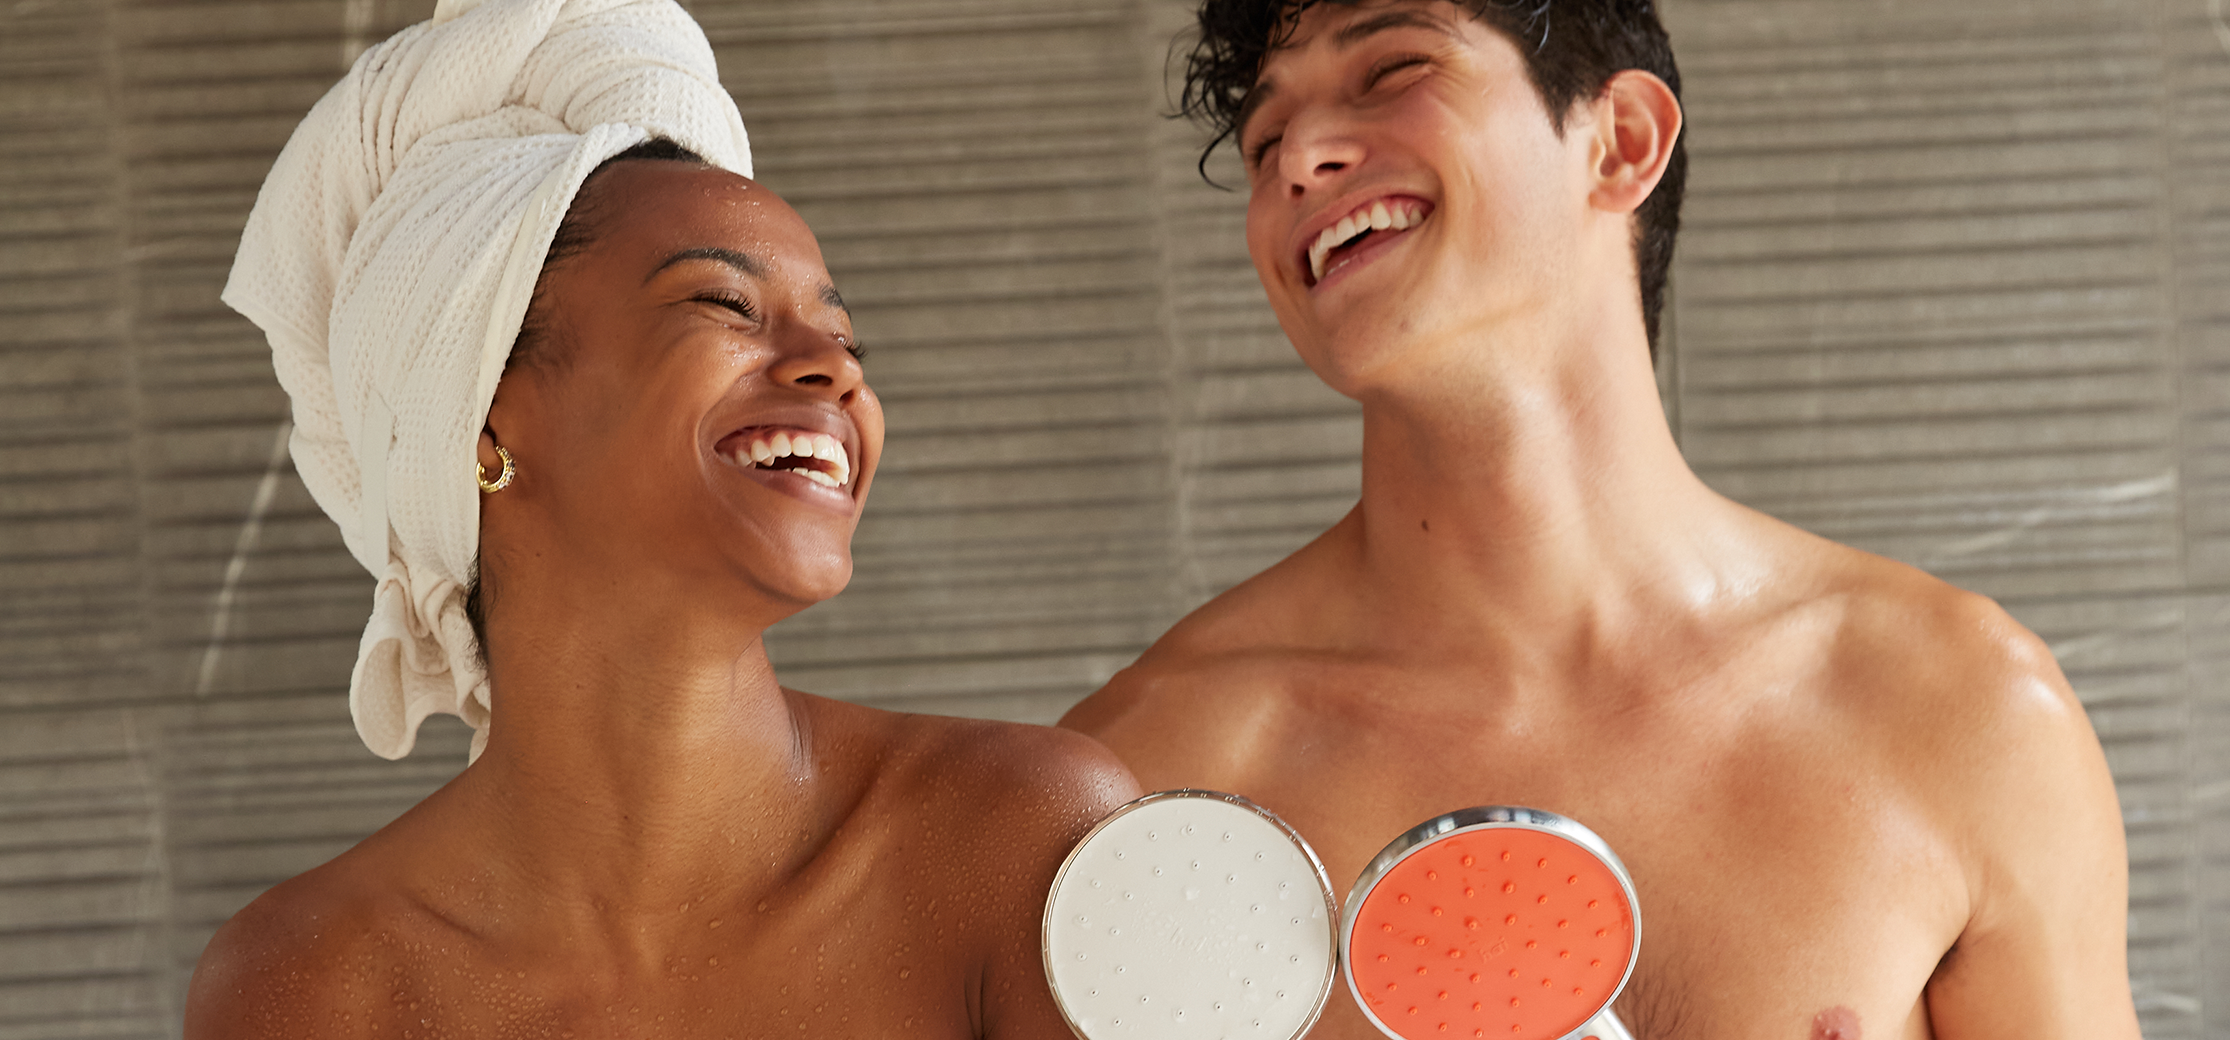 5 Smart Things to Do While Showering